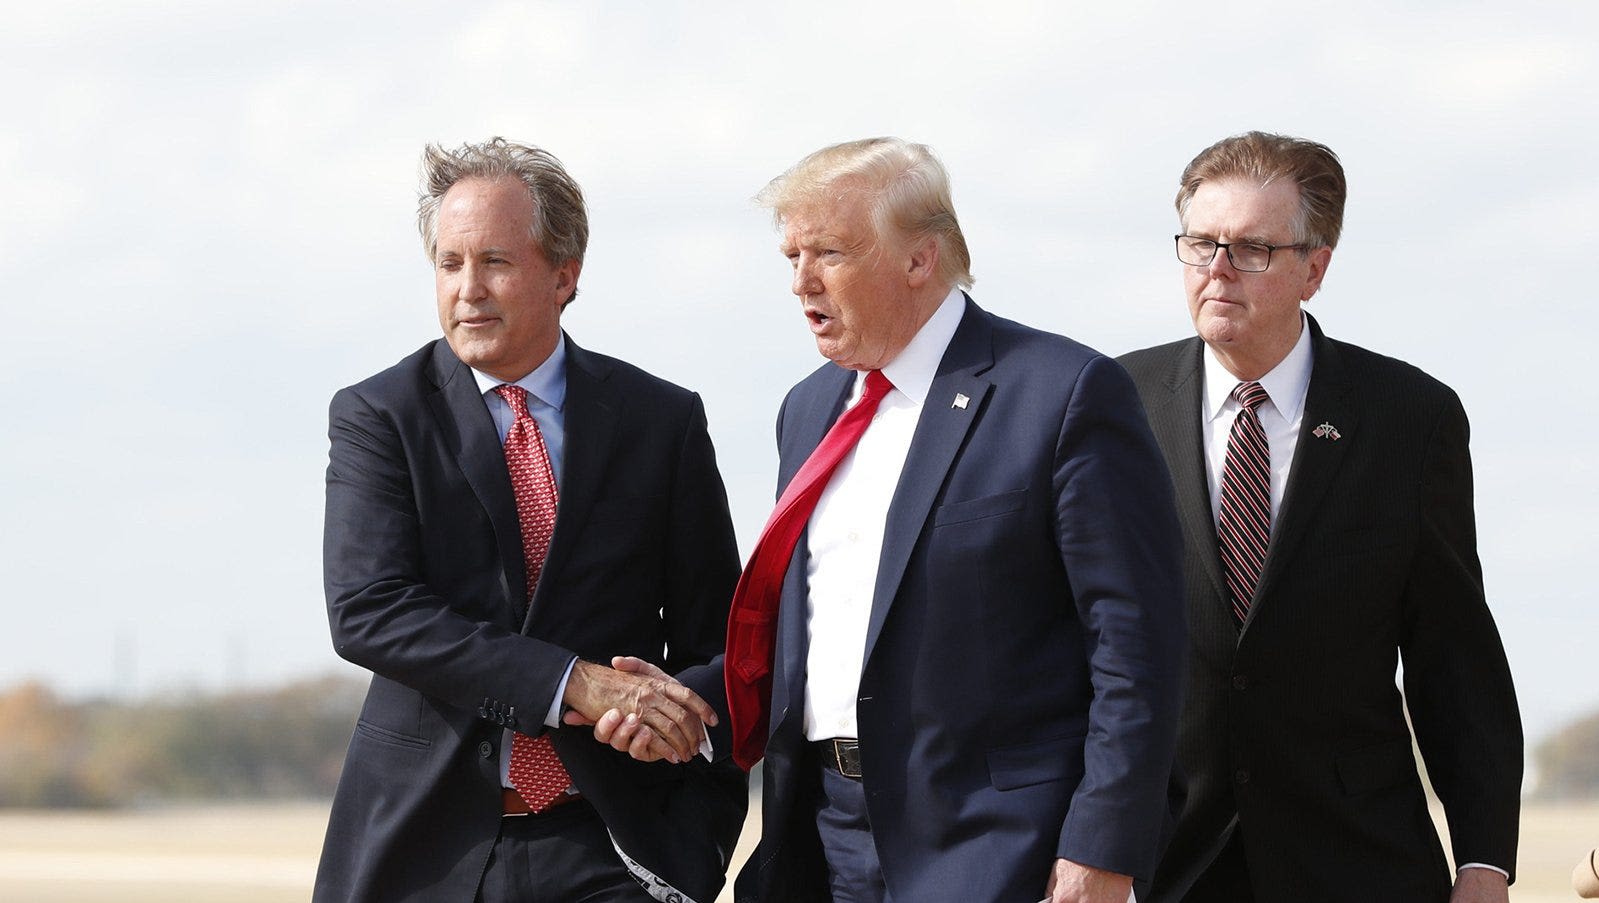 Ken Paxton for U.S. attorney general? Here's what Donald Trump said about the idea